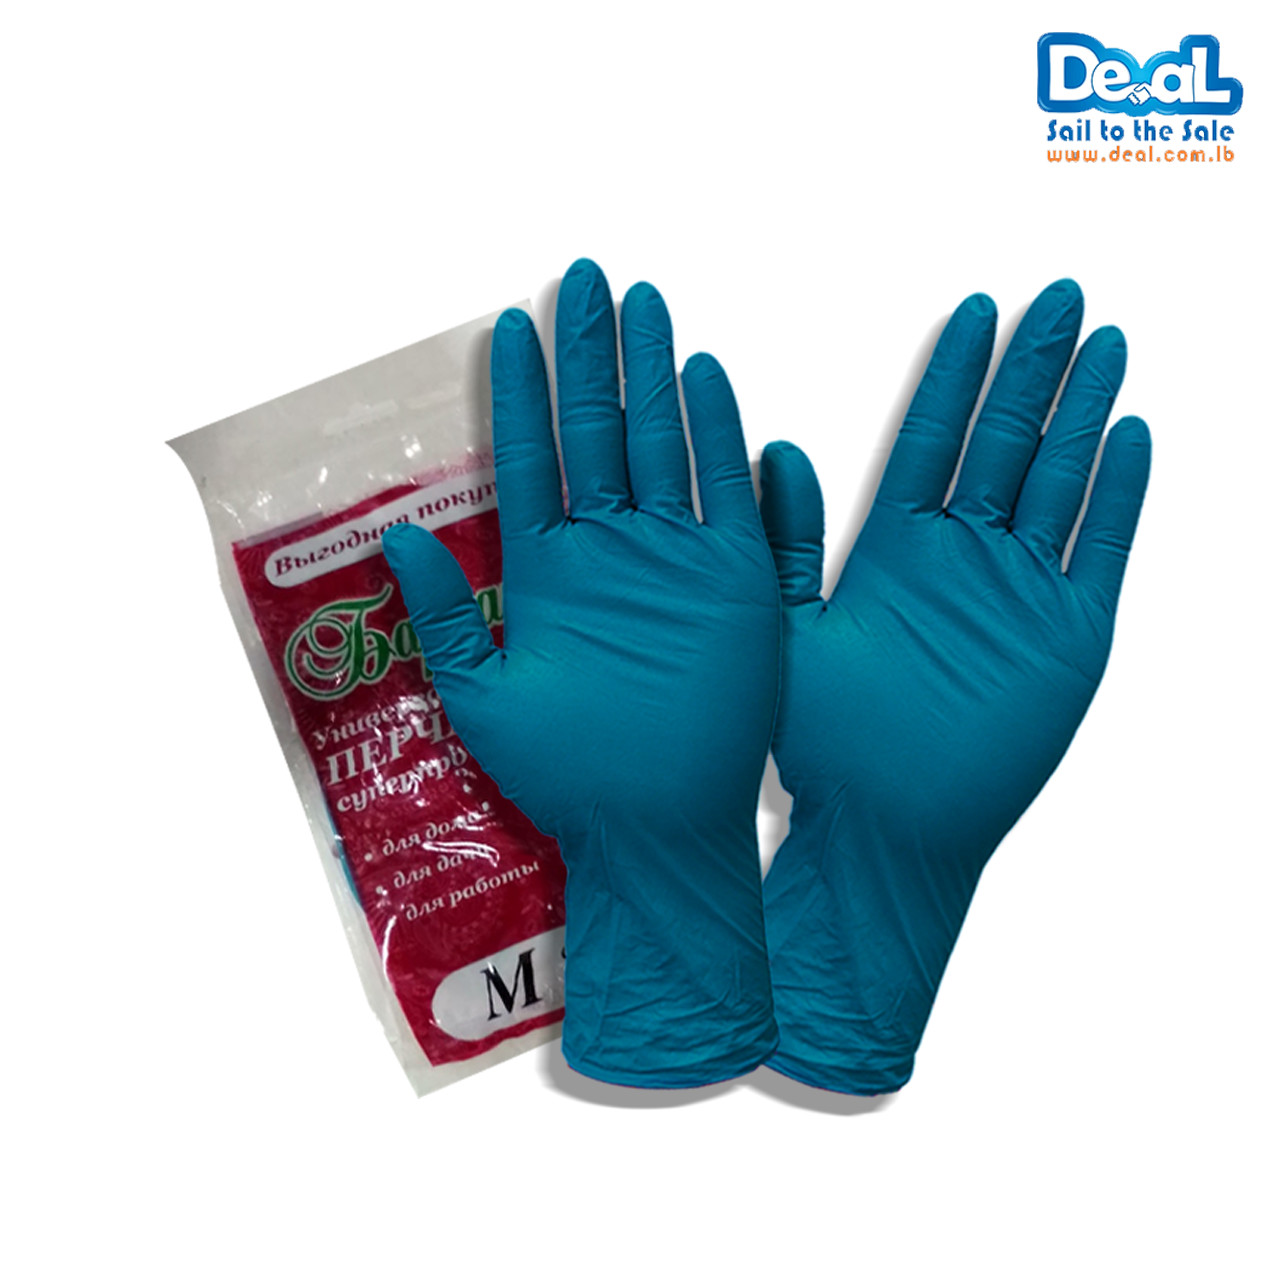 Medium+Size+High+Quality+Protective+Deal+Gloves